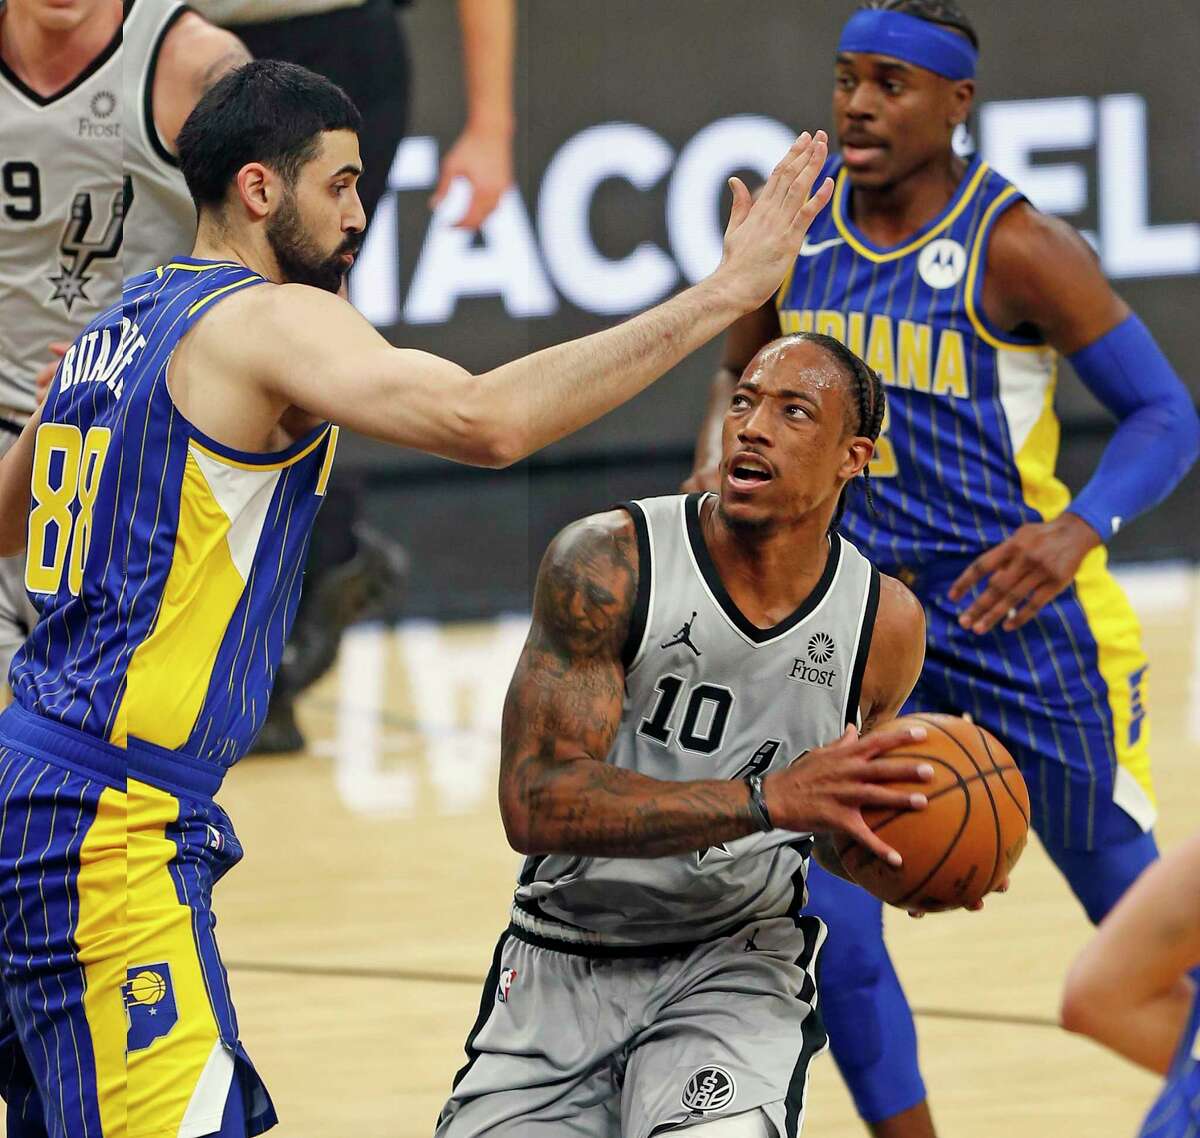 The Spurs’ DeMar DeRozan said Monday in free agency he will be signing with a championship contender, meaning his time in San Antonio is likely over.